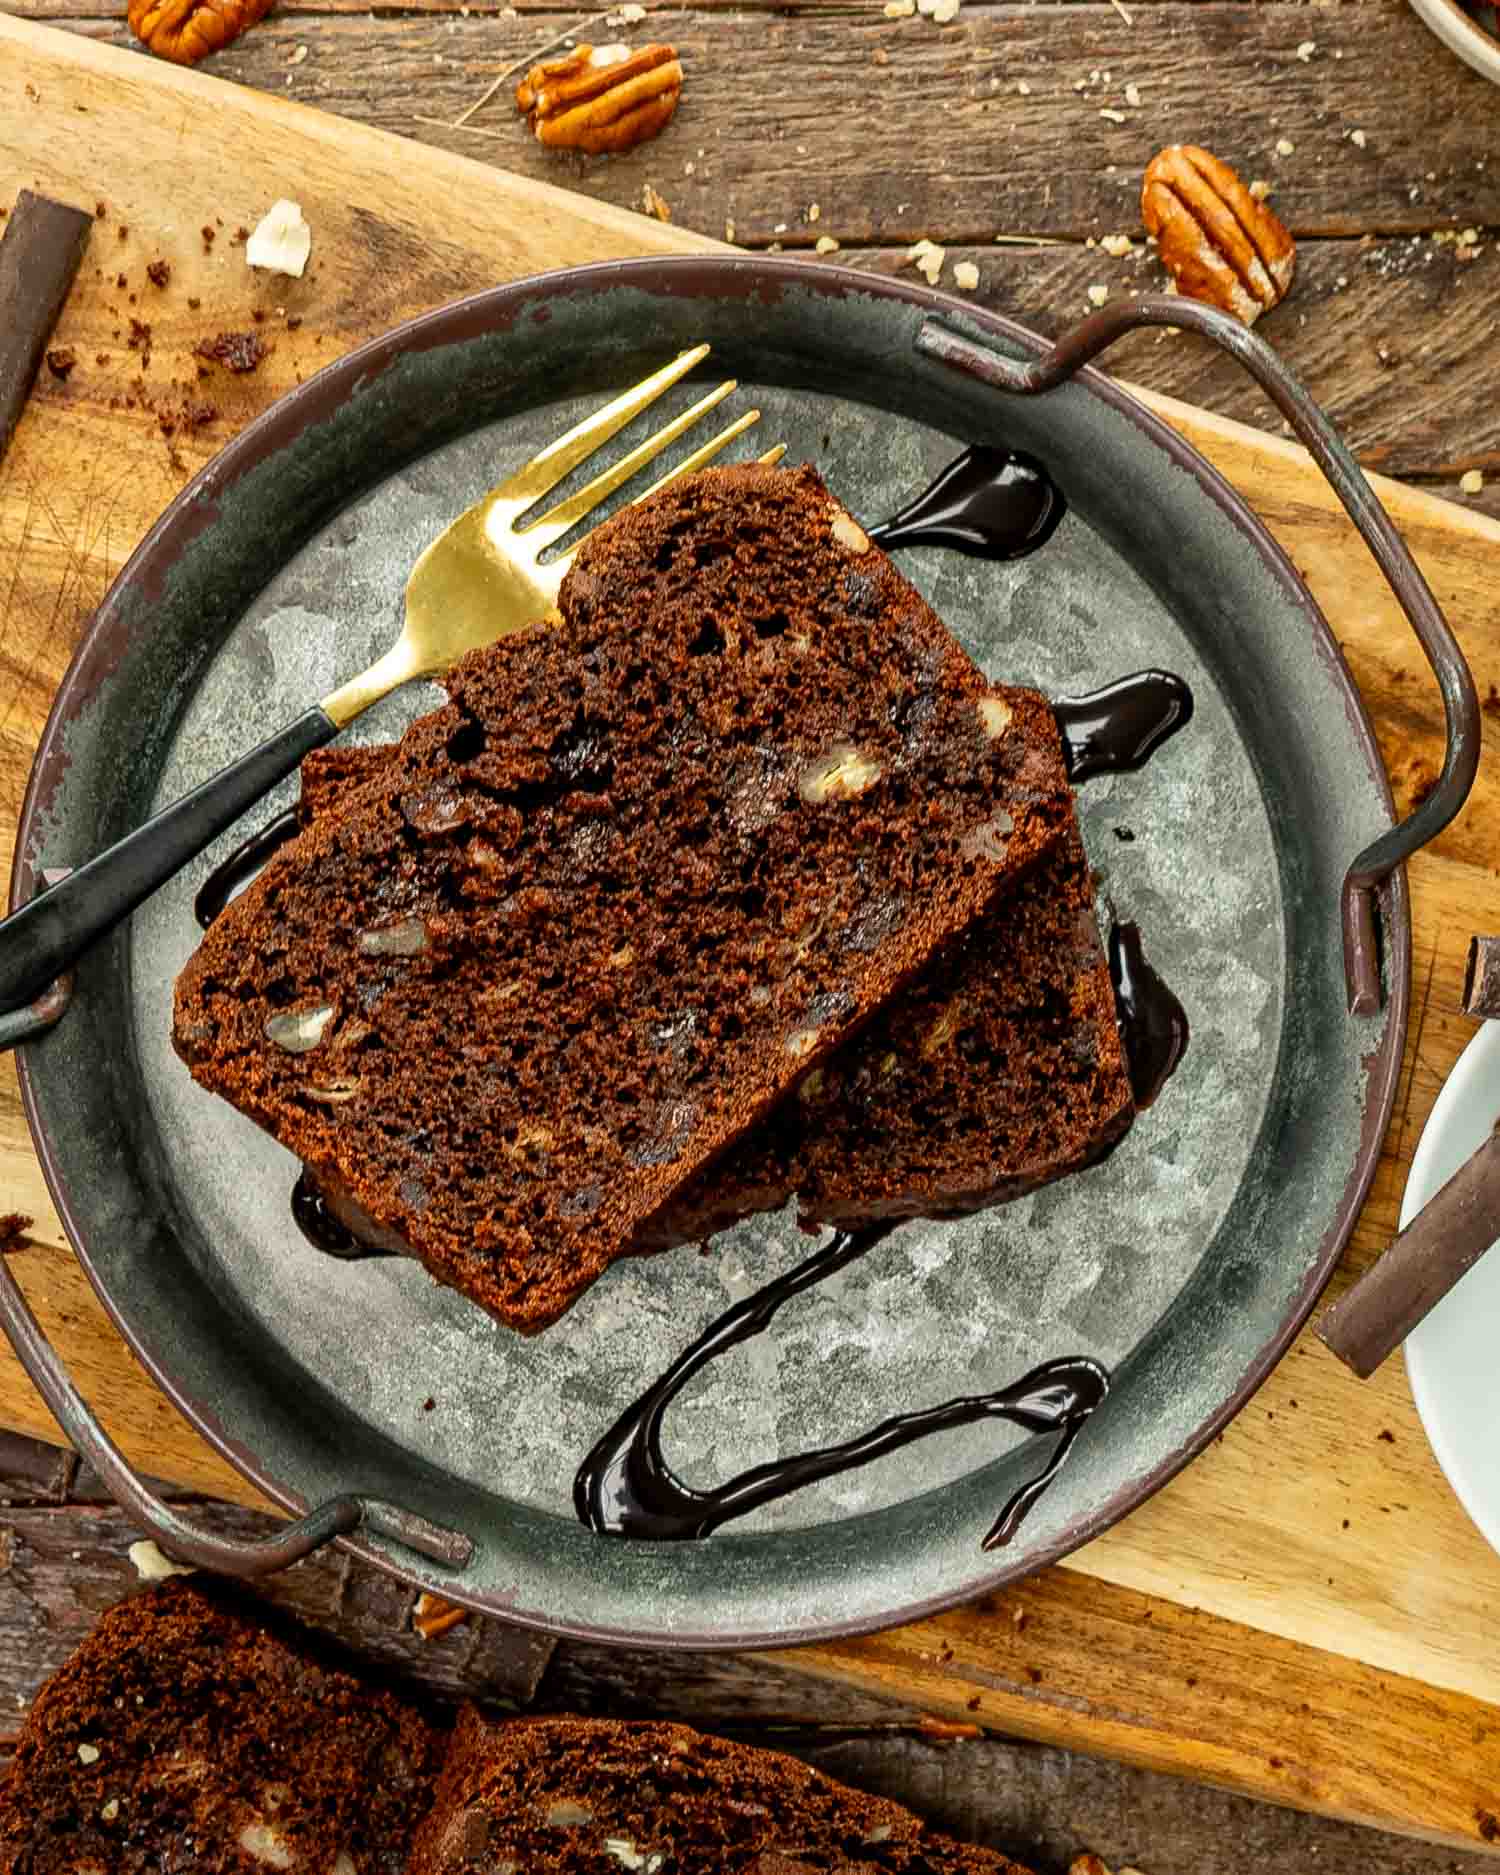 two slices of chocolate banana bread on a metal plate.